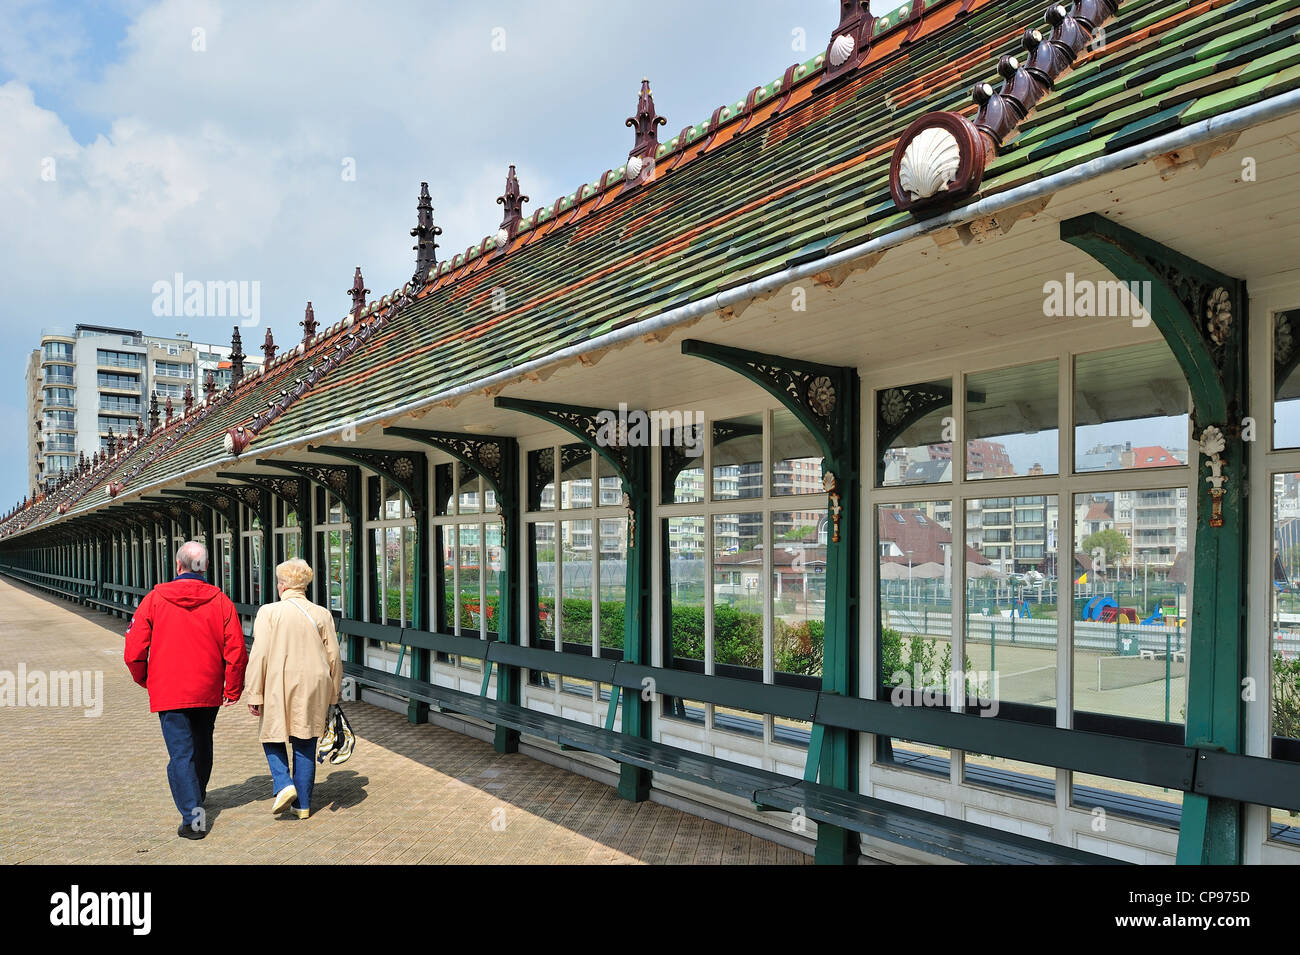 The Paravang, a windbreak dating from the Belle Epoque at the seaside resort Blankenberge along the North Sea coast, Belgium Stock Photo